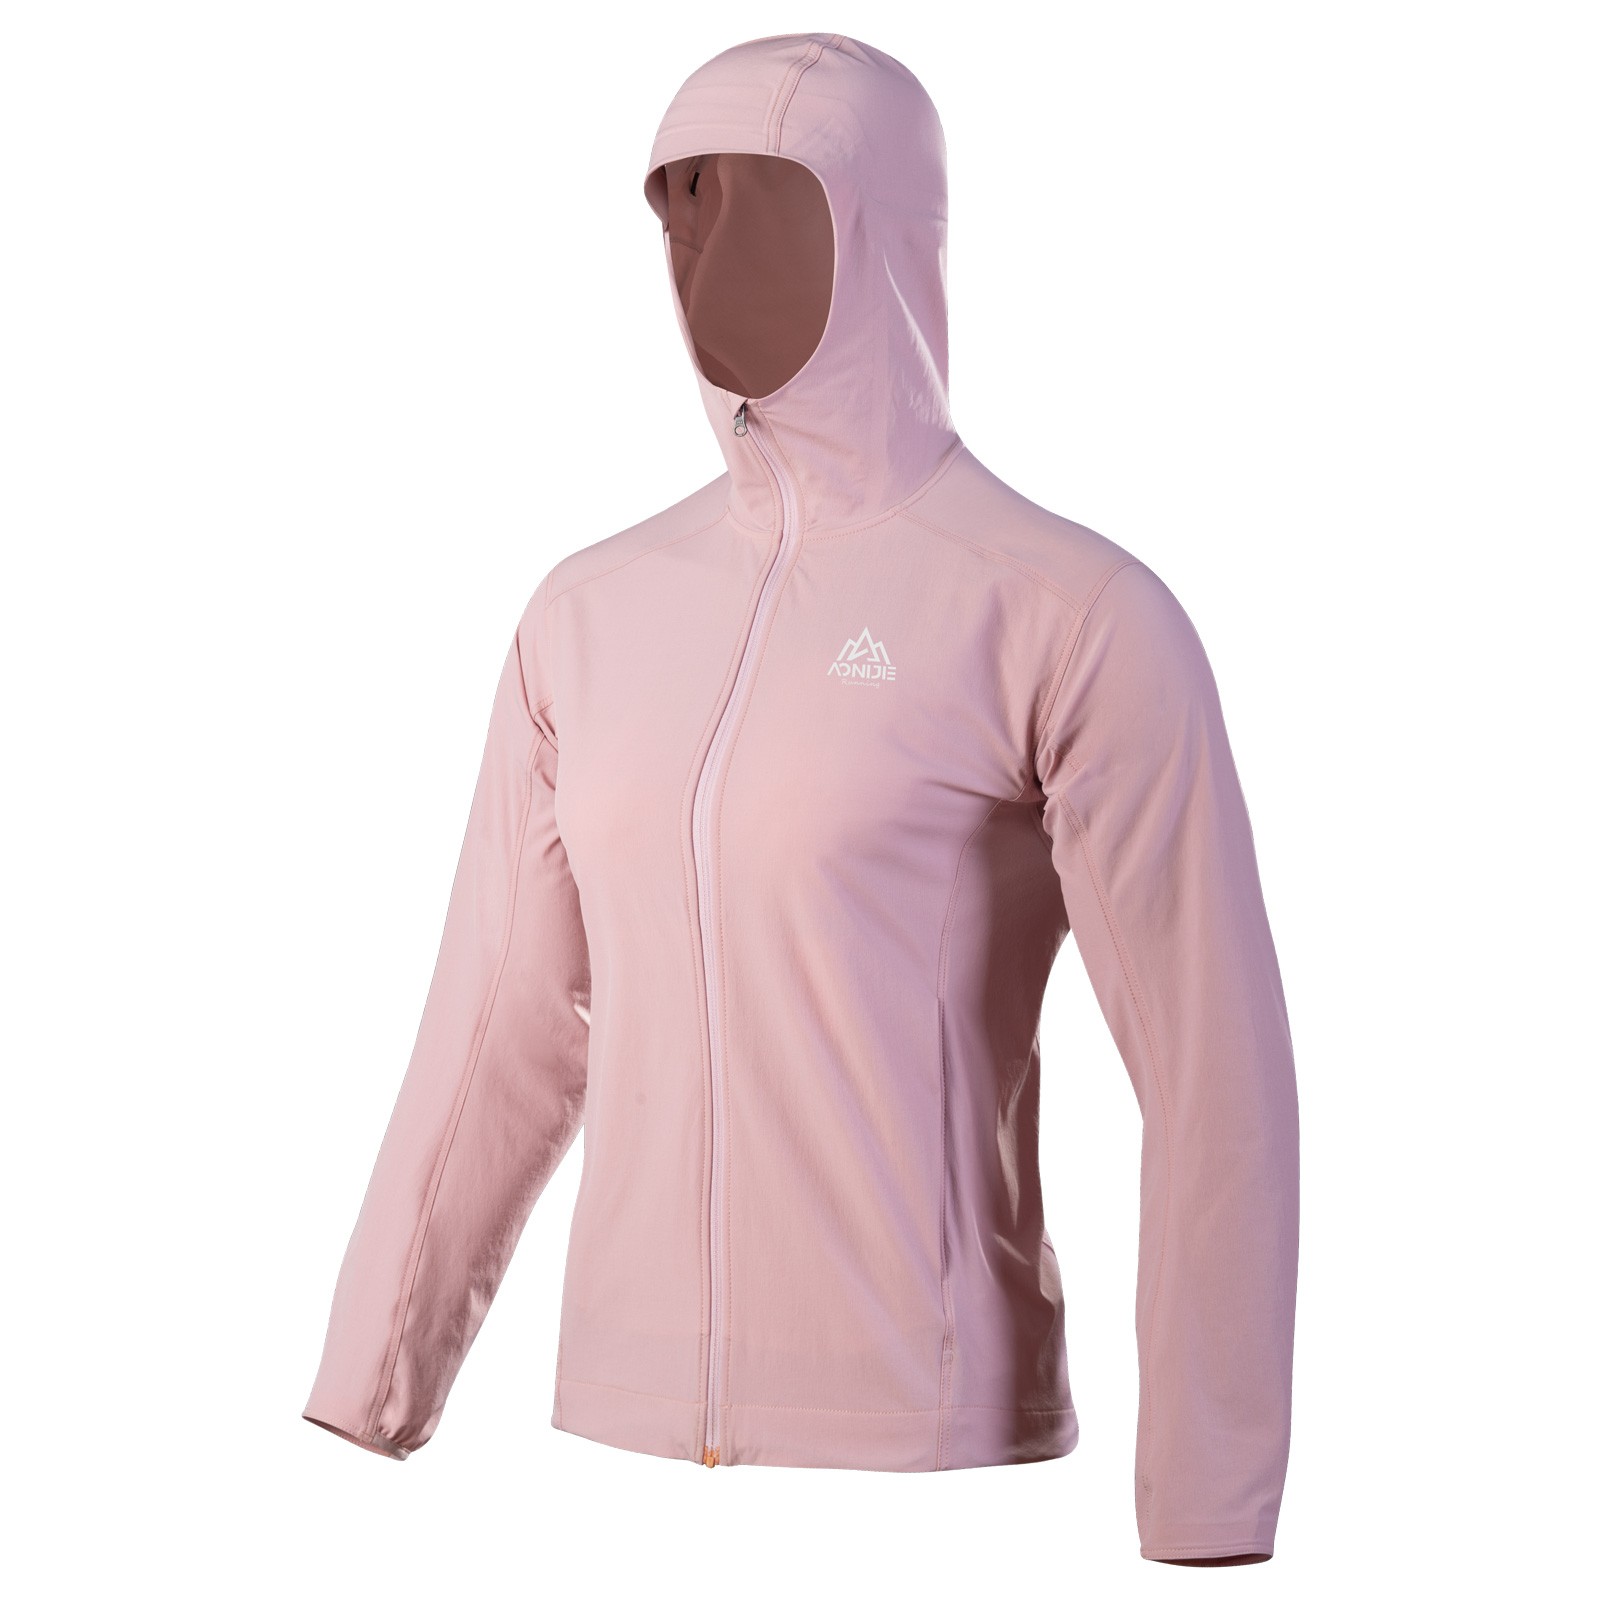 AONIJIE FW5136 Sports Women Casual Jacket Black Pink Femal Running Coats Windproof Breathable Jackets for Outdoor Leisure Daily Use